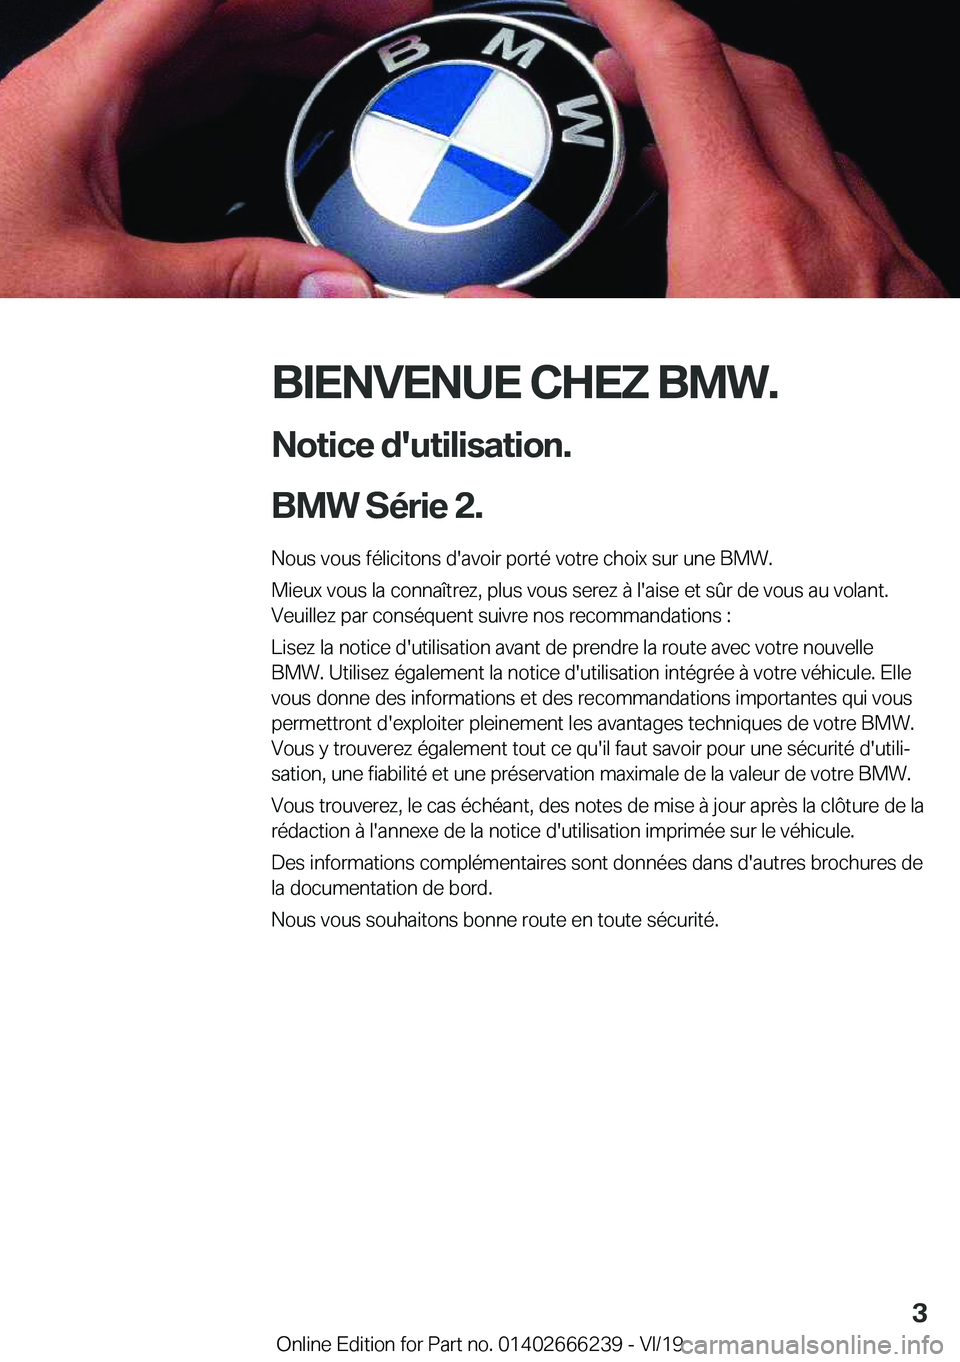 BMW 2 SERIES COUPE 2020  Notices Demploi (in French) �B�I�E�N�V�E�N�U�E��C�H�E�;��B�M�W�.�N�o�t�i�c�e��d�'�u�t�i�l�i�s�a�t�i�o�n�.
�B�M�W��S�é�r�i�e��2�.�
�N�o�u�s��v�o�u�s��f�é�l�i�c�i�t�o�n�s��d�'�a�v�o�i�r��p�o�r�t�é��v�o�t�r�e�